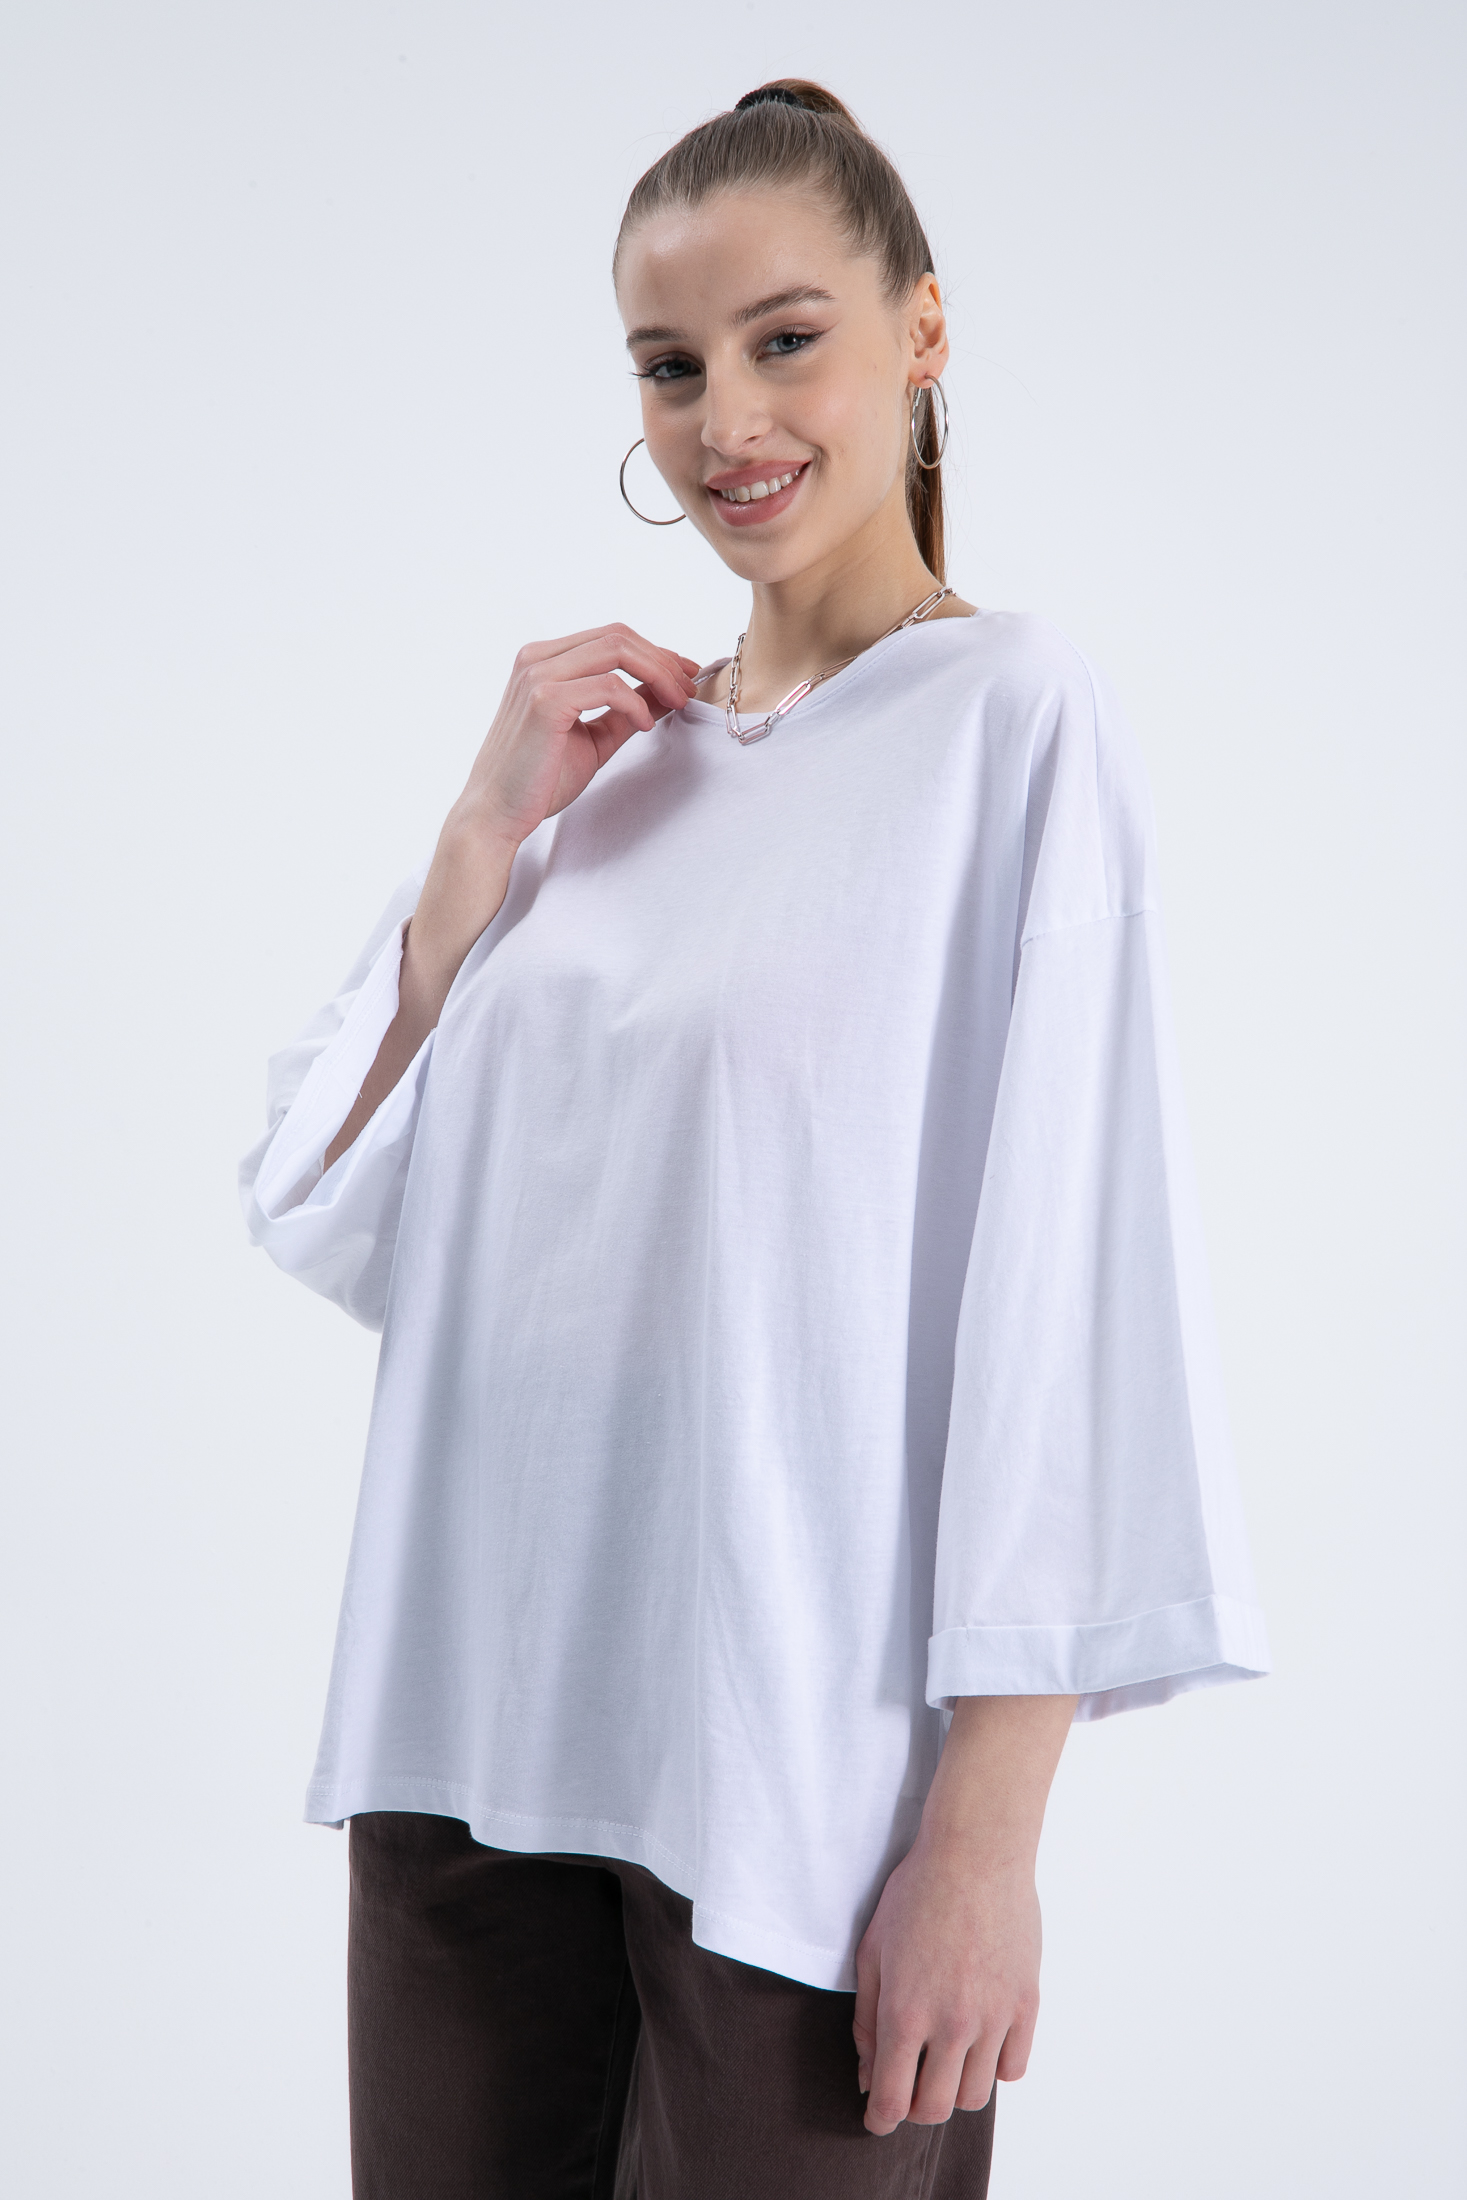 A model wears CRO10066 - T-shirt - White, wholesale Tshirt of Cream Rouge to display at Lonca